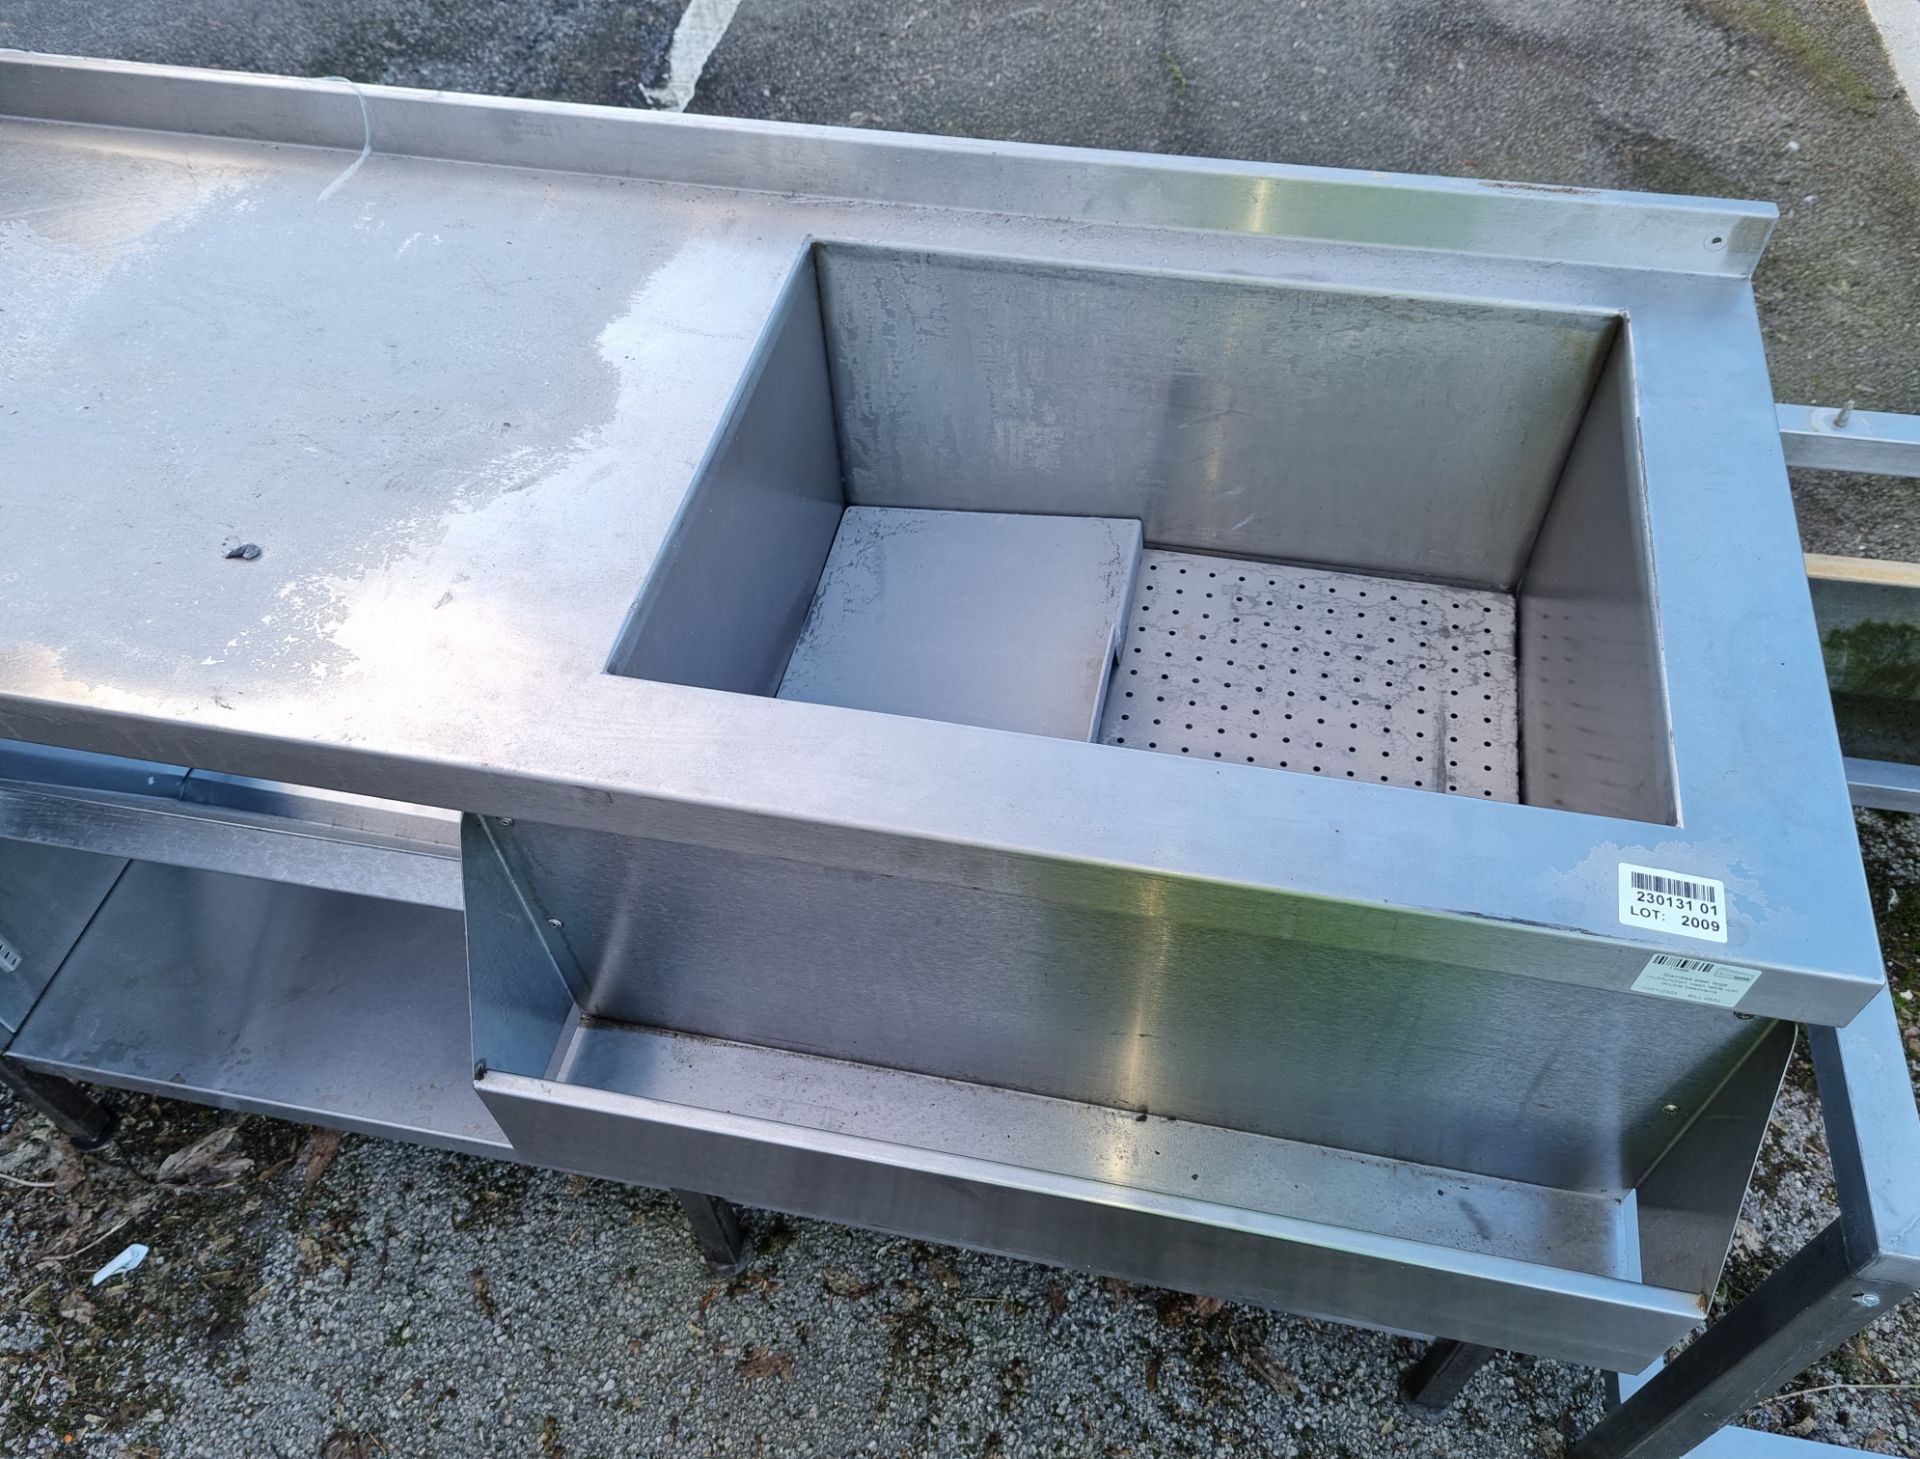 Stainless steel large multifunction wash table with double basin/sink - L2930 x D700 x H950mm - Image 2 of 4